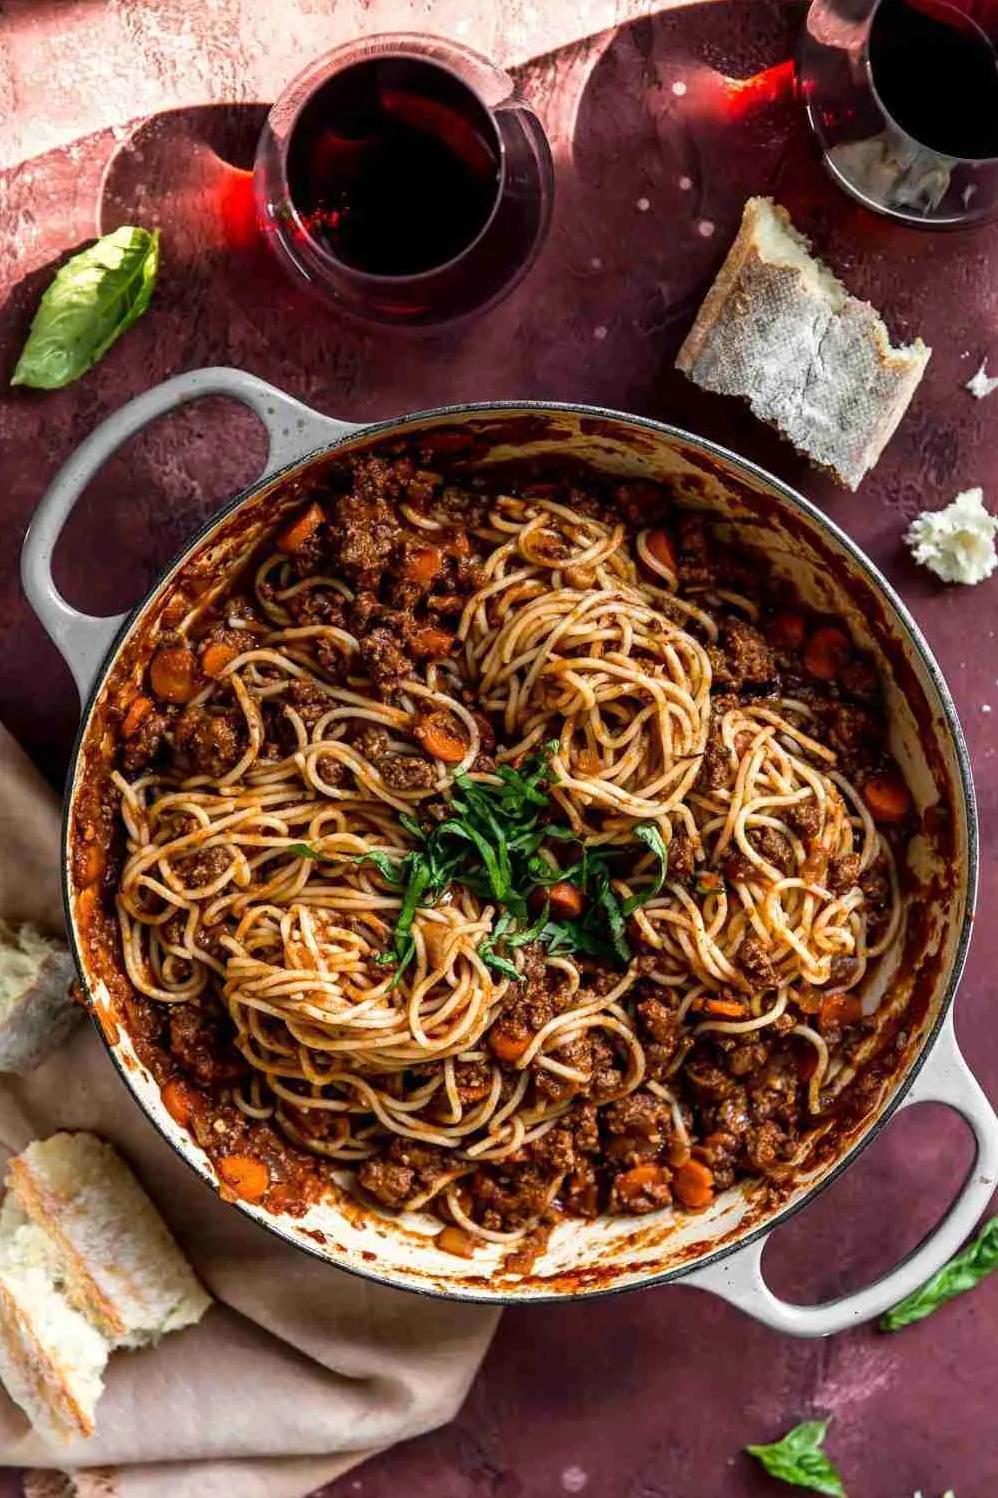  The secret ingredient in this Spaghetti Bolognese? Red wine! 🍷🍝